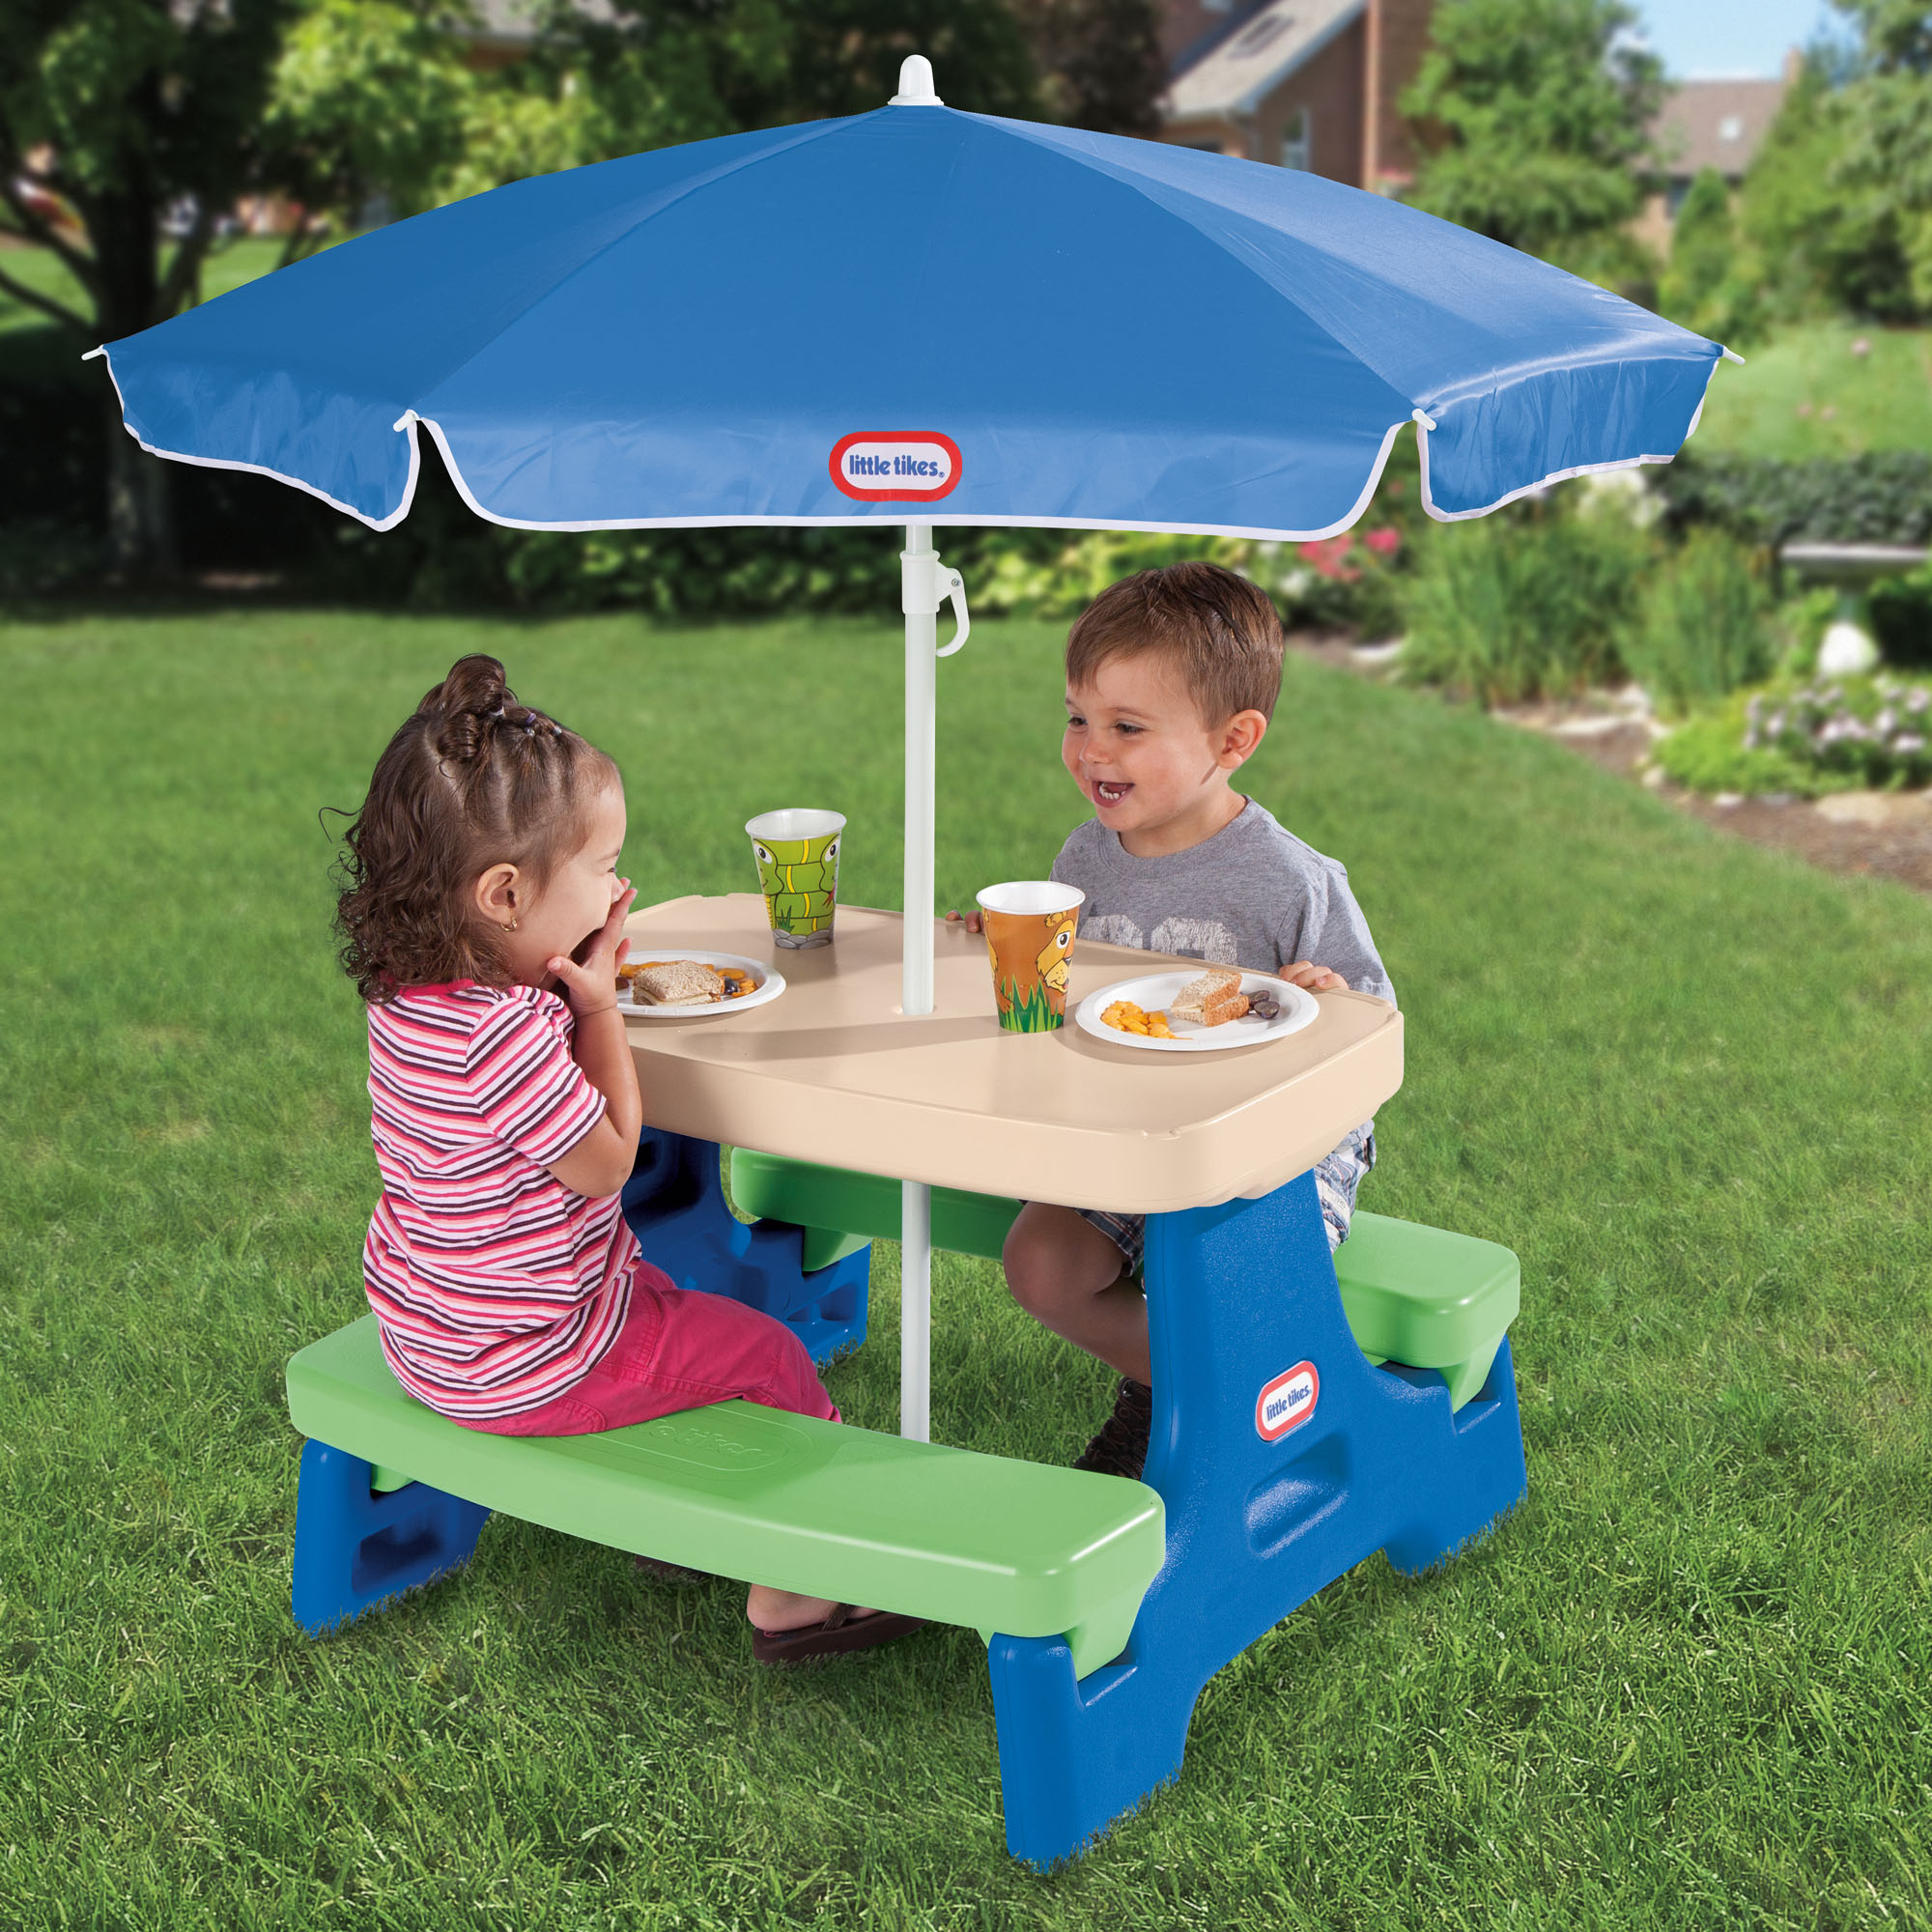 Little Tikes Easy Store Jr. Picnic Table with Umbrella, Blue & Green - Play Table with Umbrella, for Kids - image 4 of 7